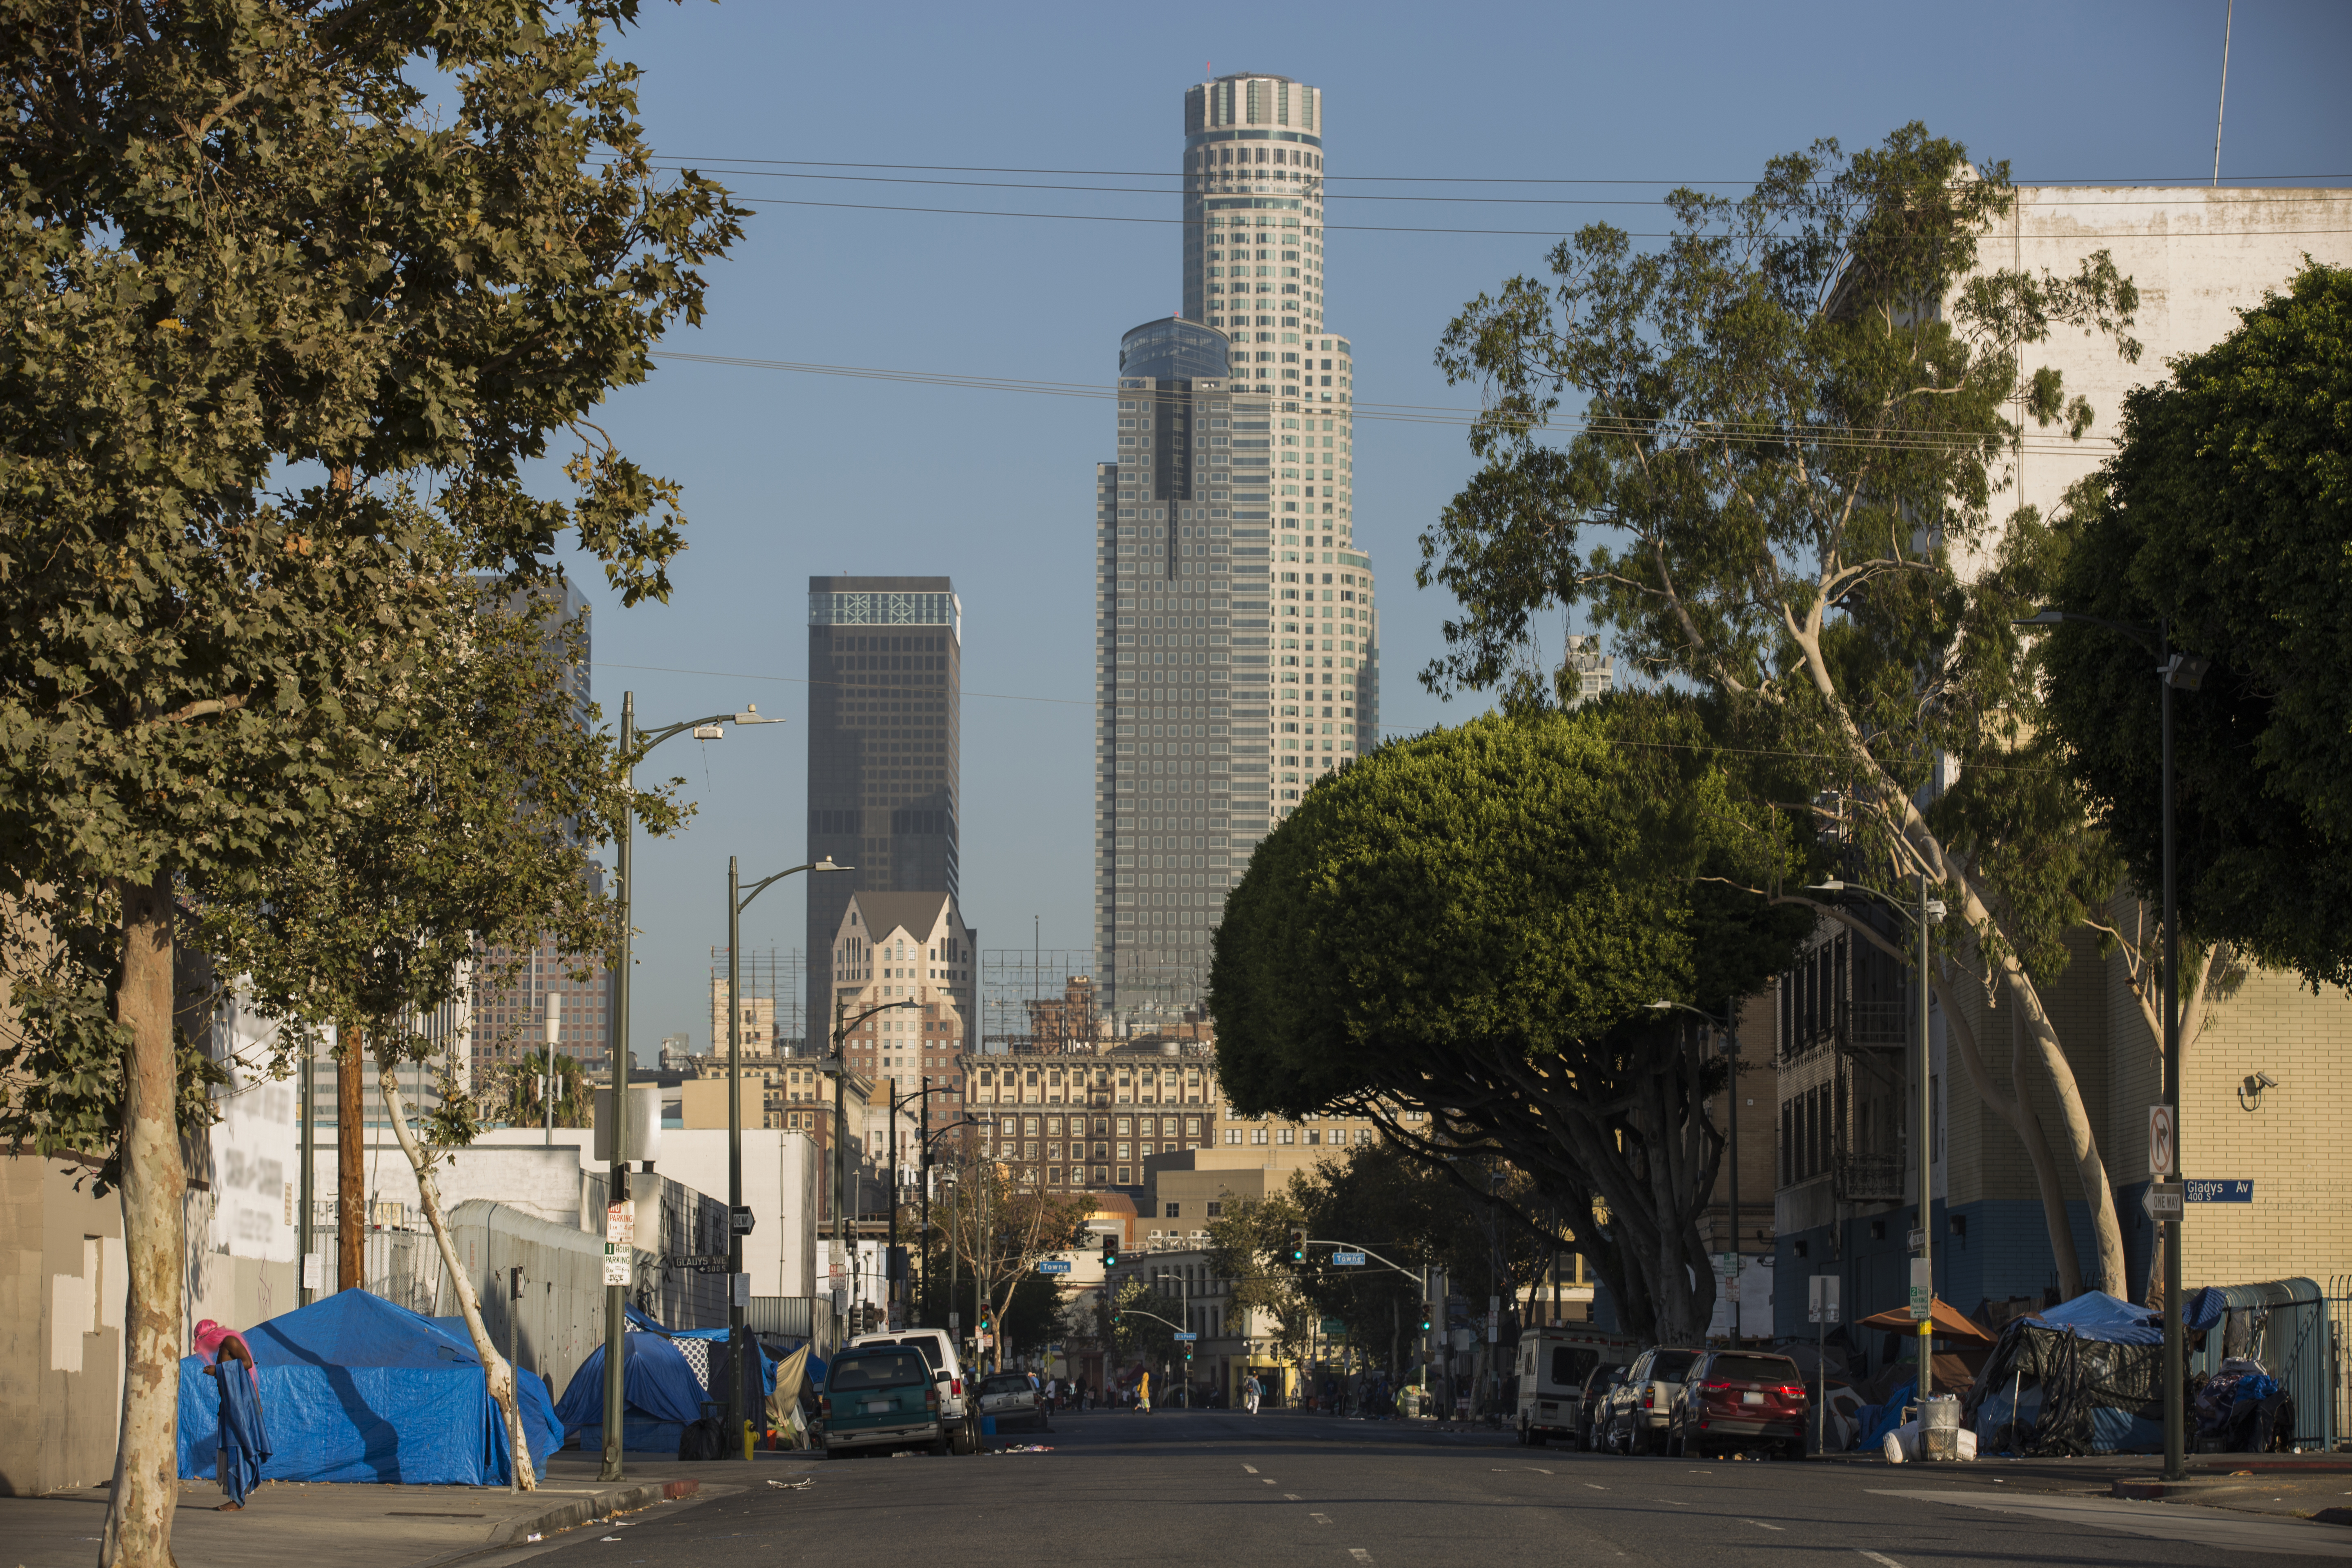 How is City Planning Incentivizing Affordable Housing Production?